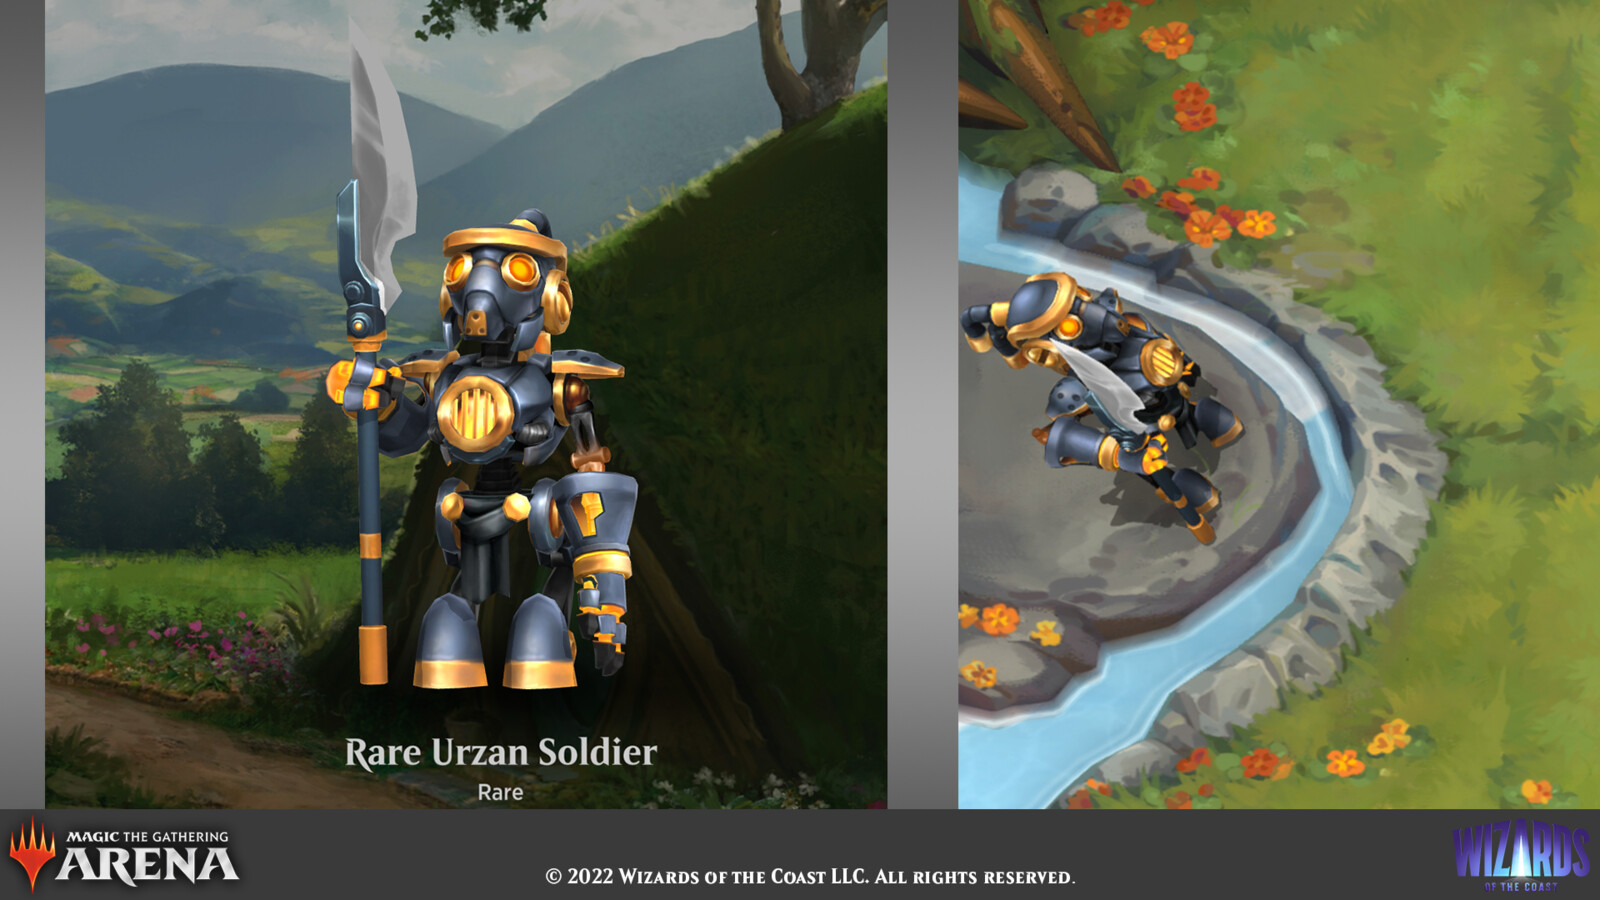 Select pet and game views for the Rare Urzan Solider